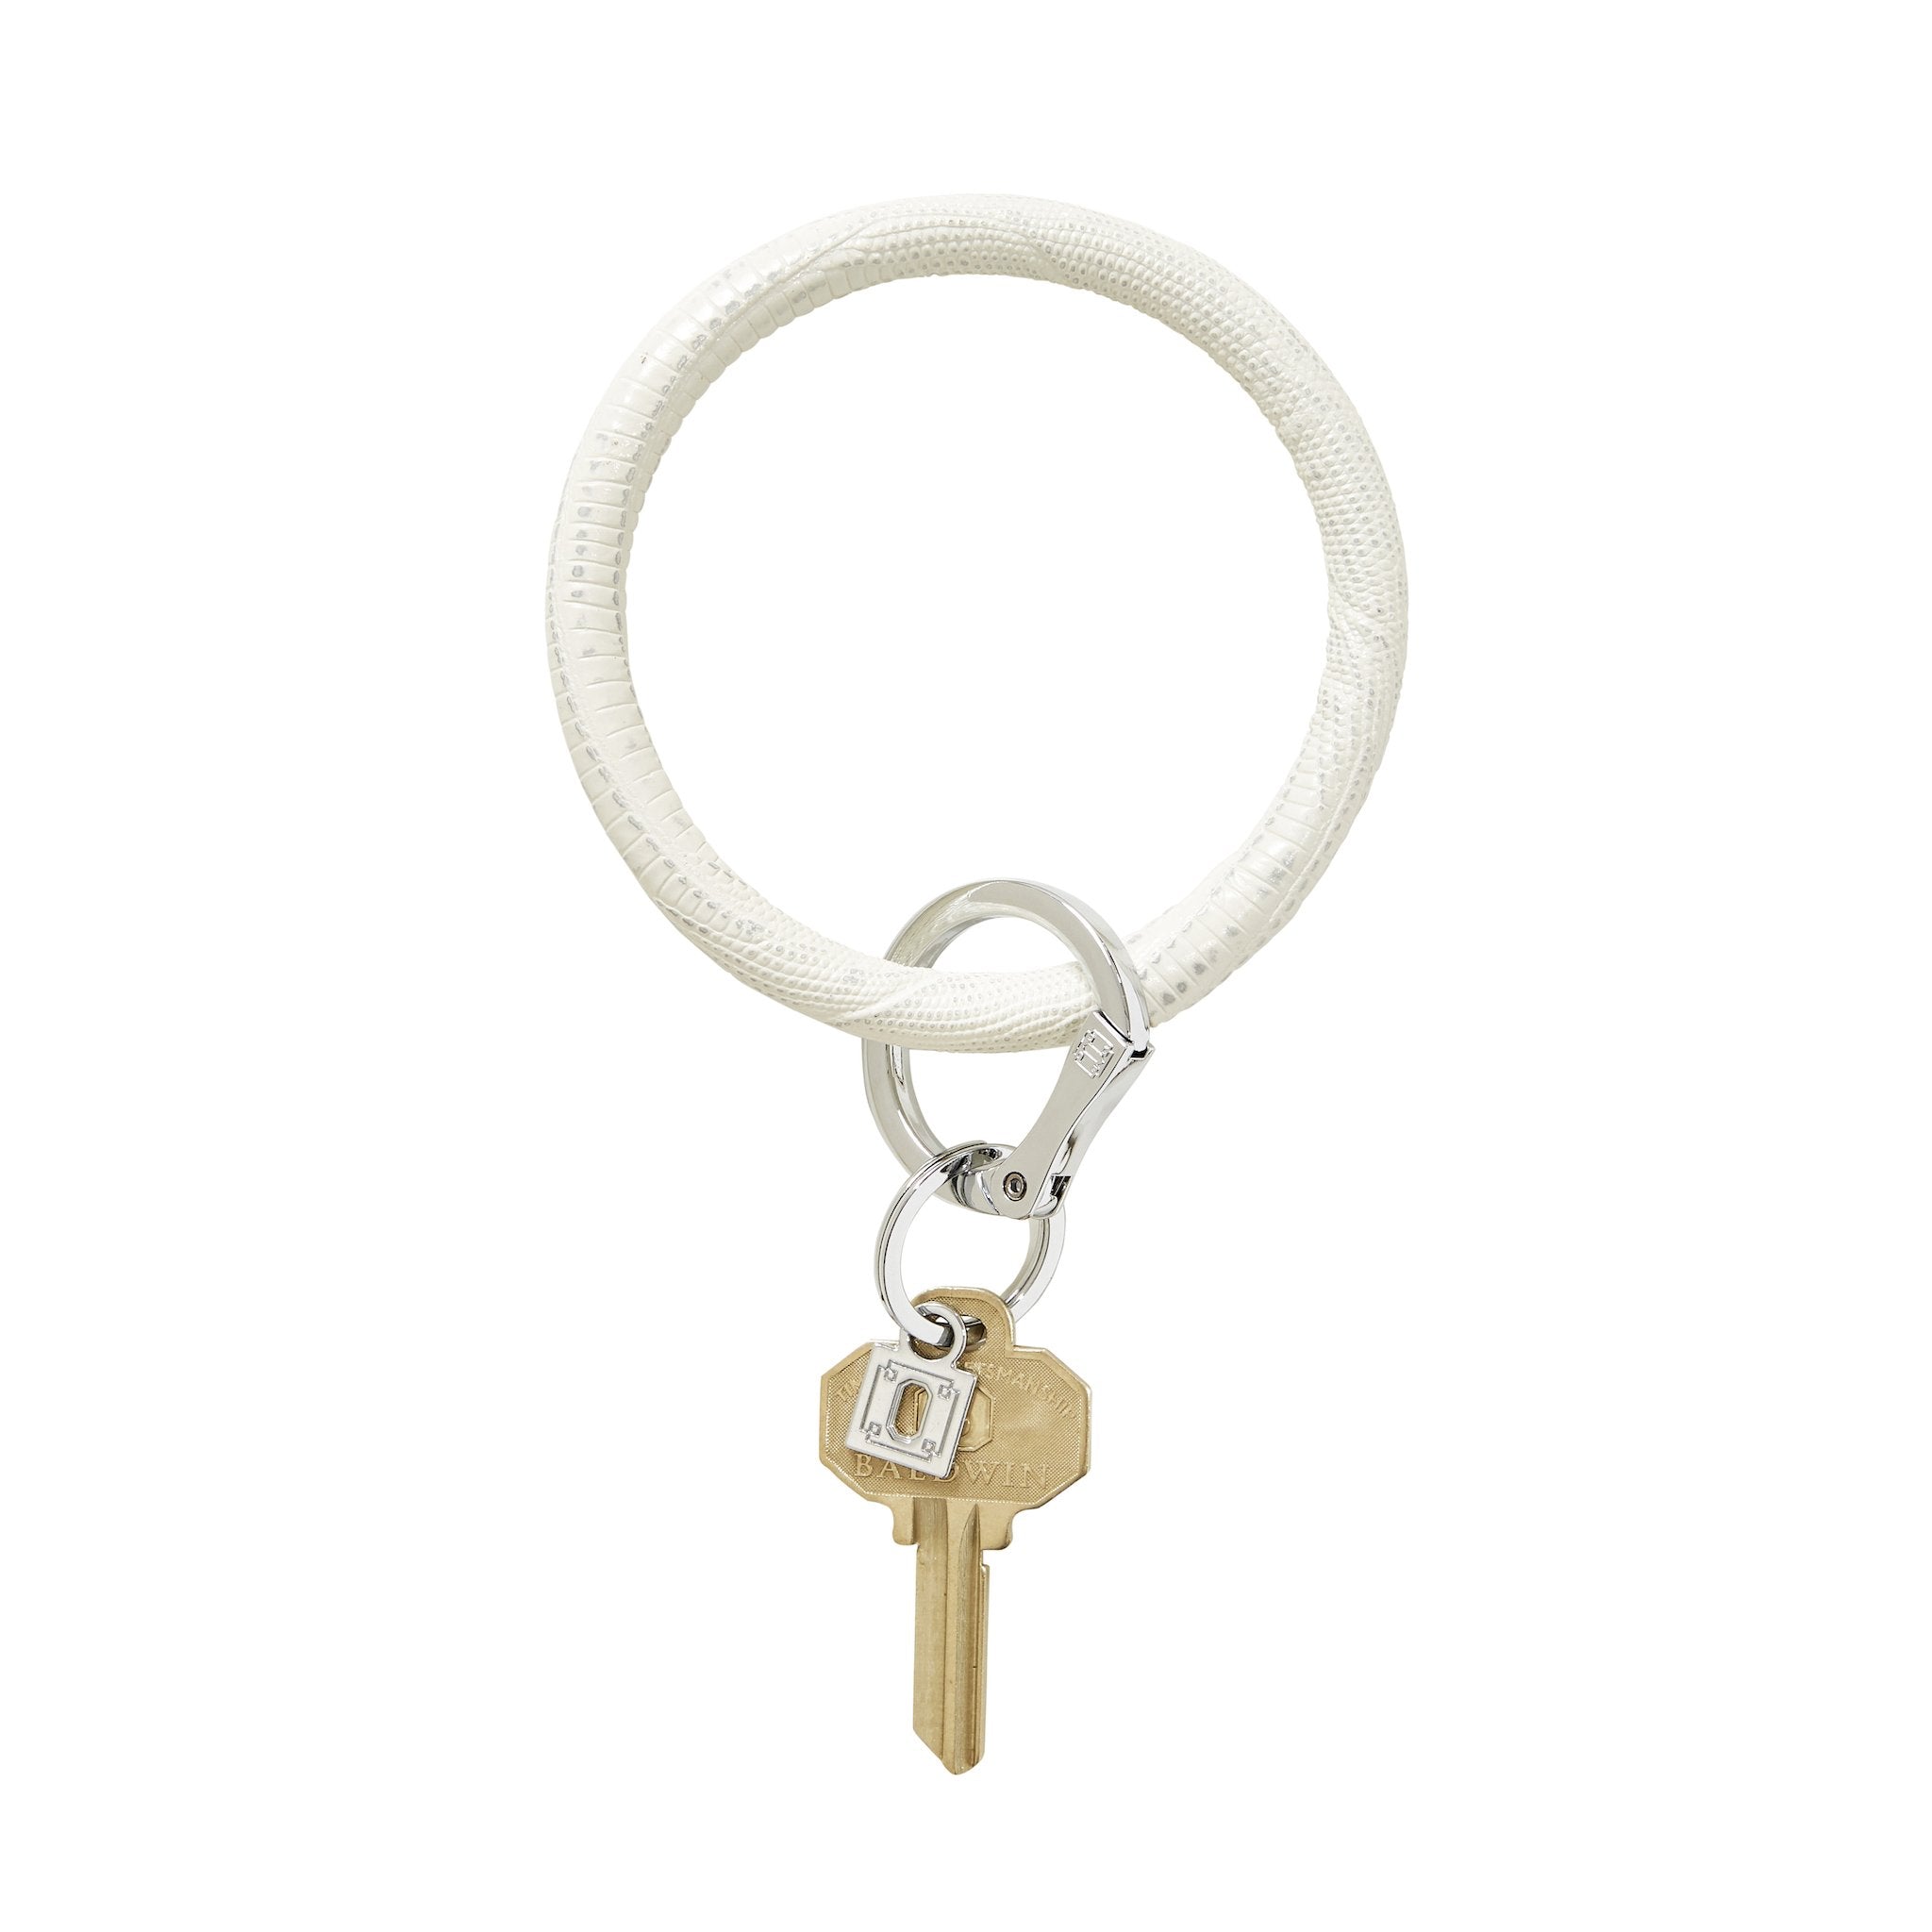 Big O Key Ring - Snakeskin/Lizard Leather - Gift and Gourmet